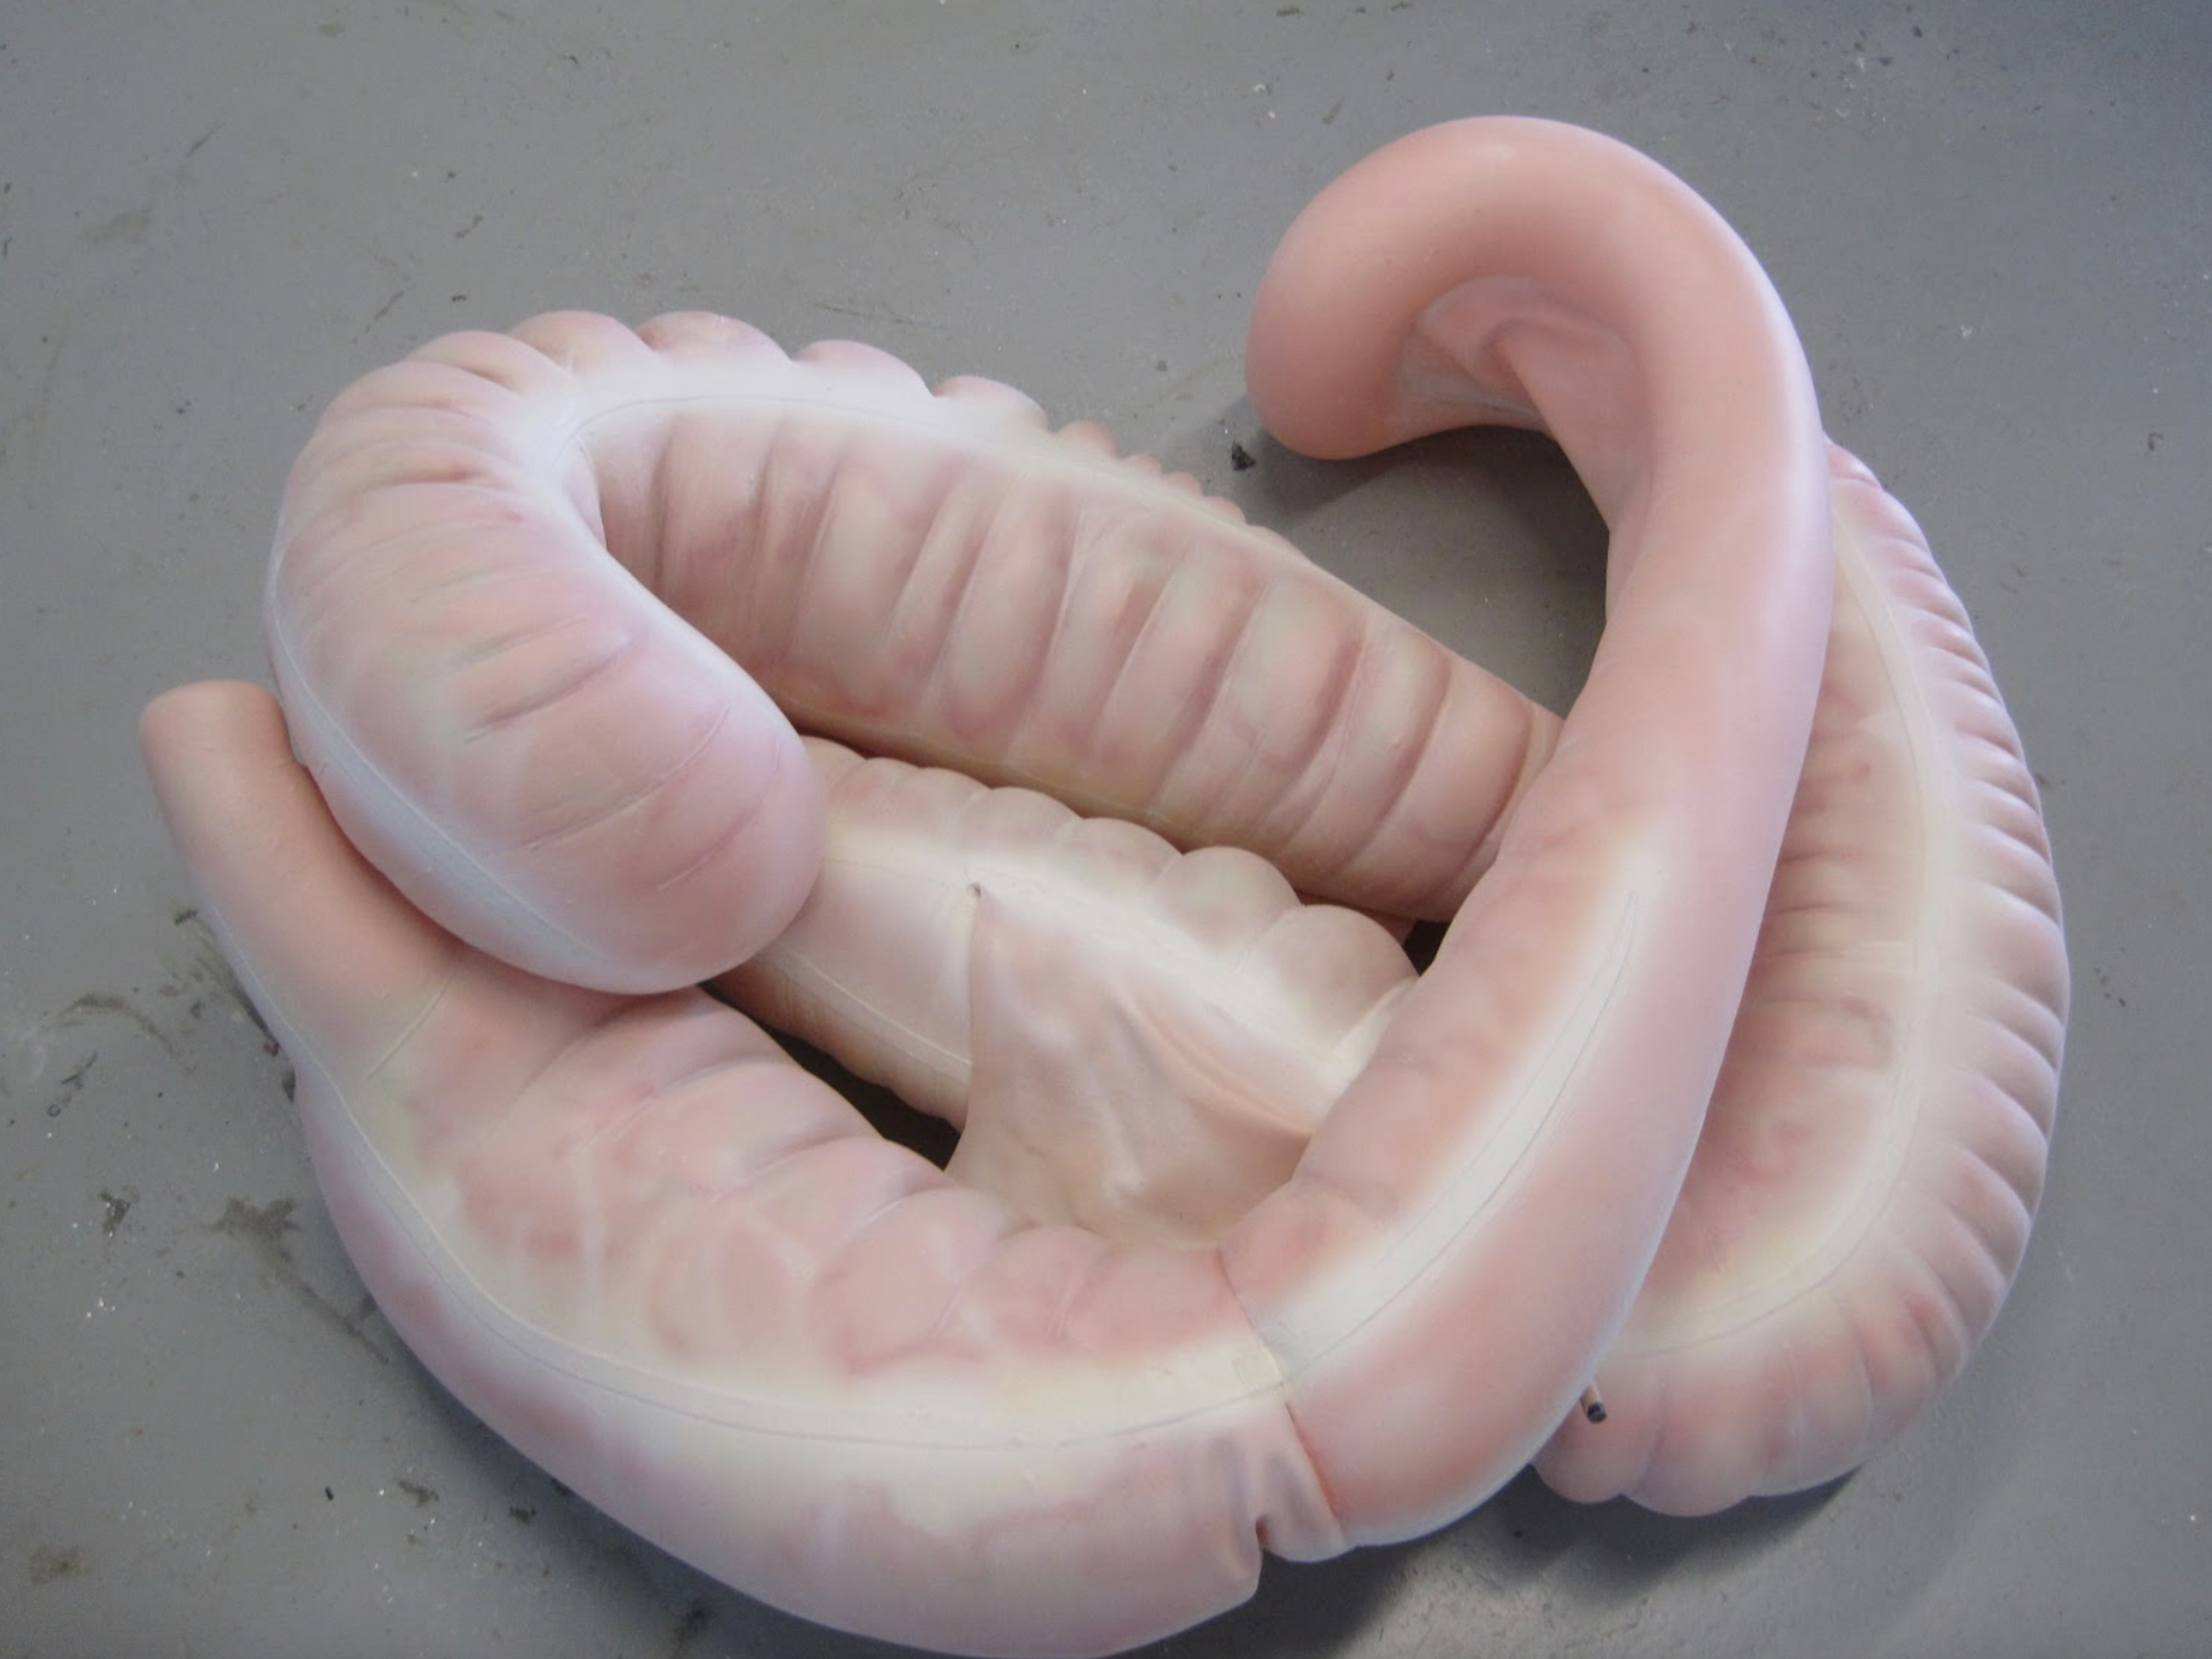  The next two photos show the completed inflatable colon model that will be used in the equine palpation/colic model. &nbsp;The colon can be positioned to simulate various colic conditions and displacements. 